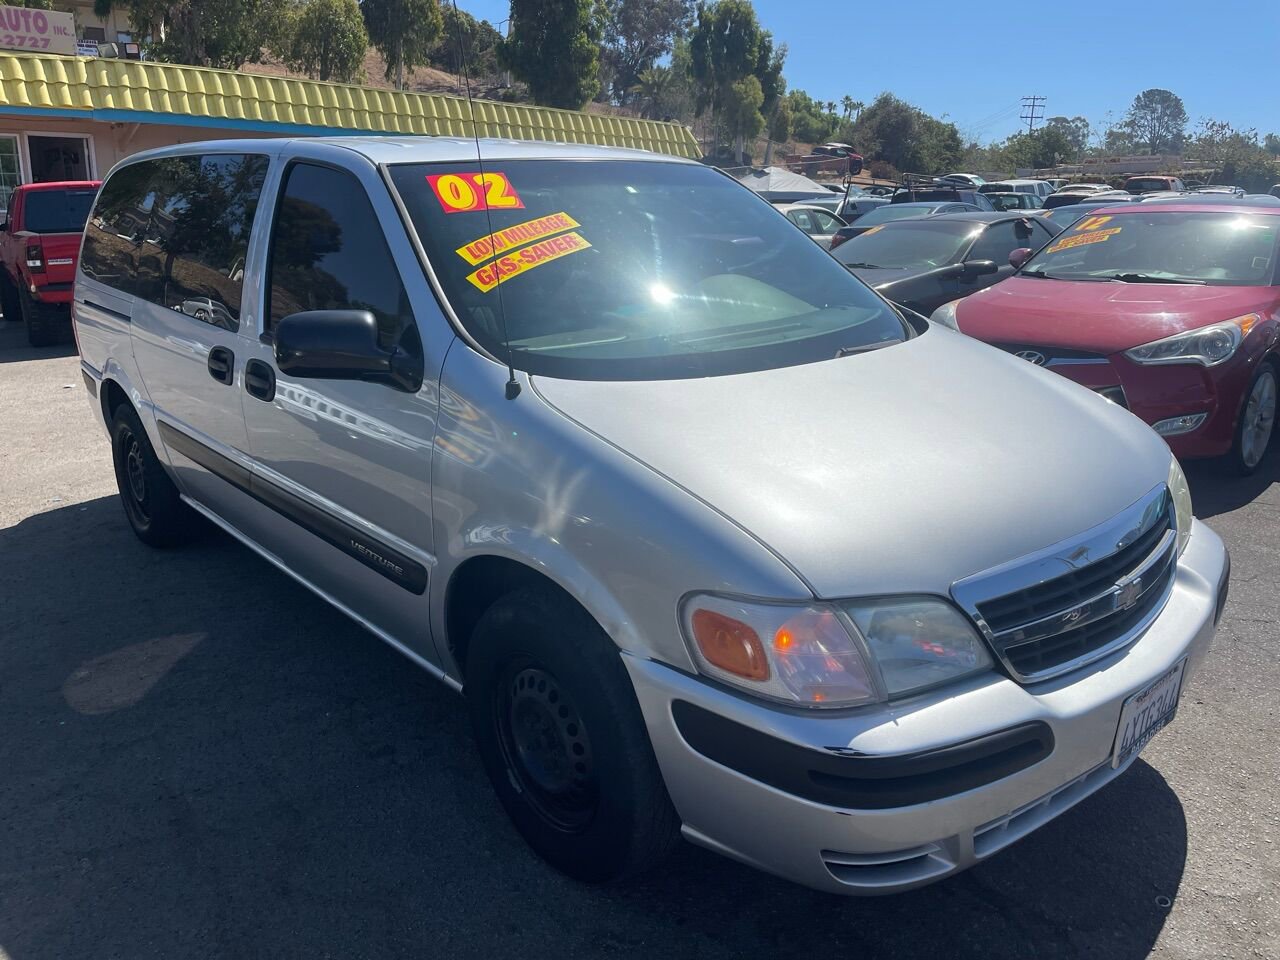 Used Chevrolet Venture for Sale Right Now - Autotrader